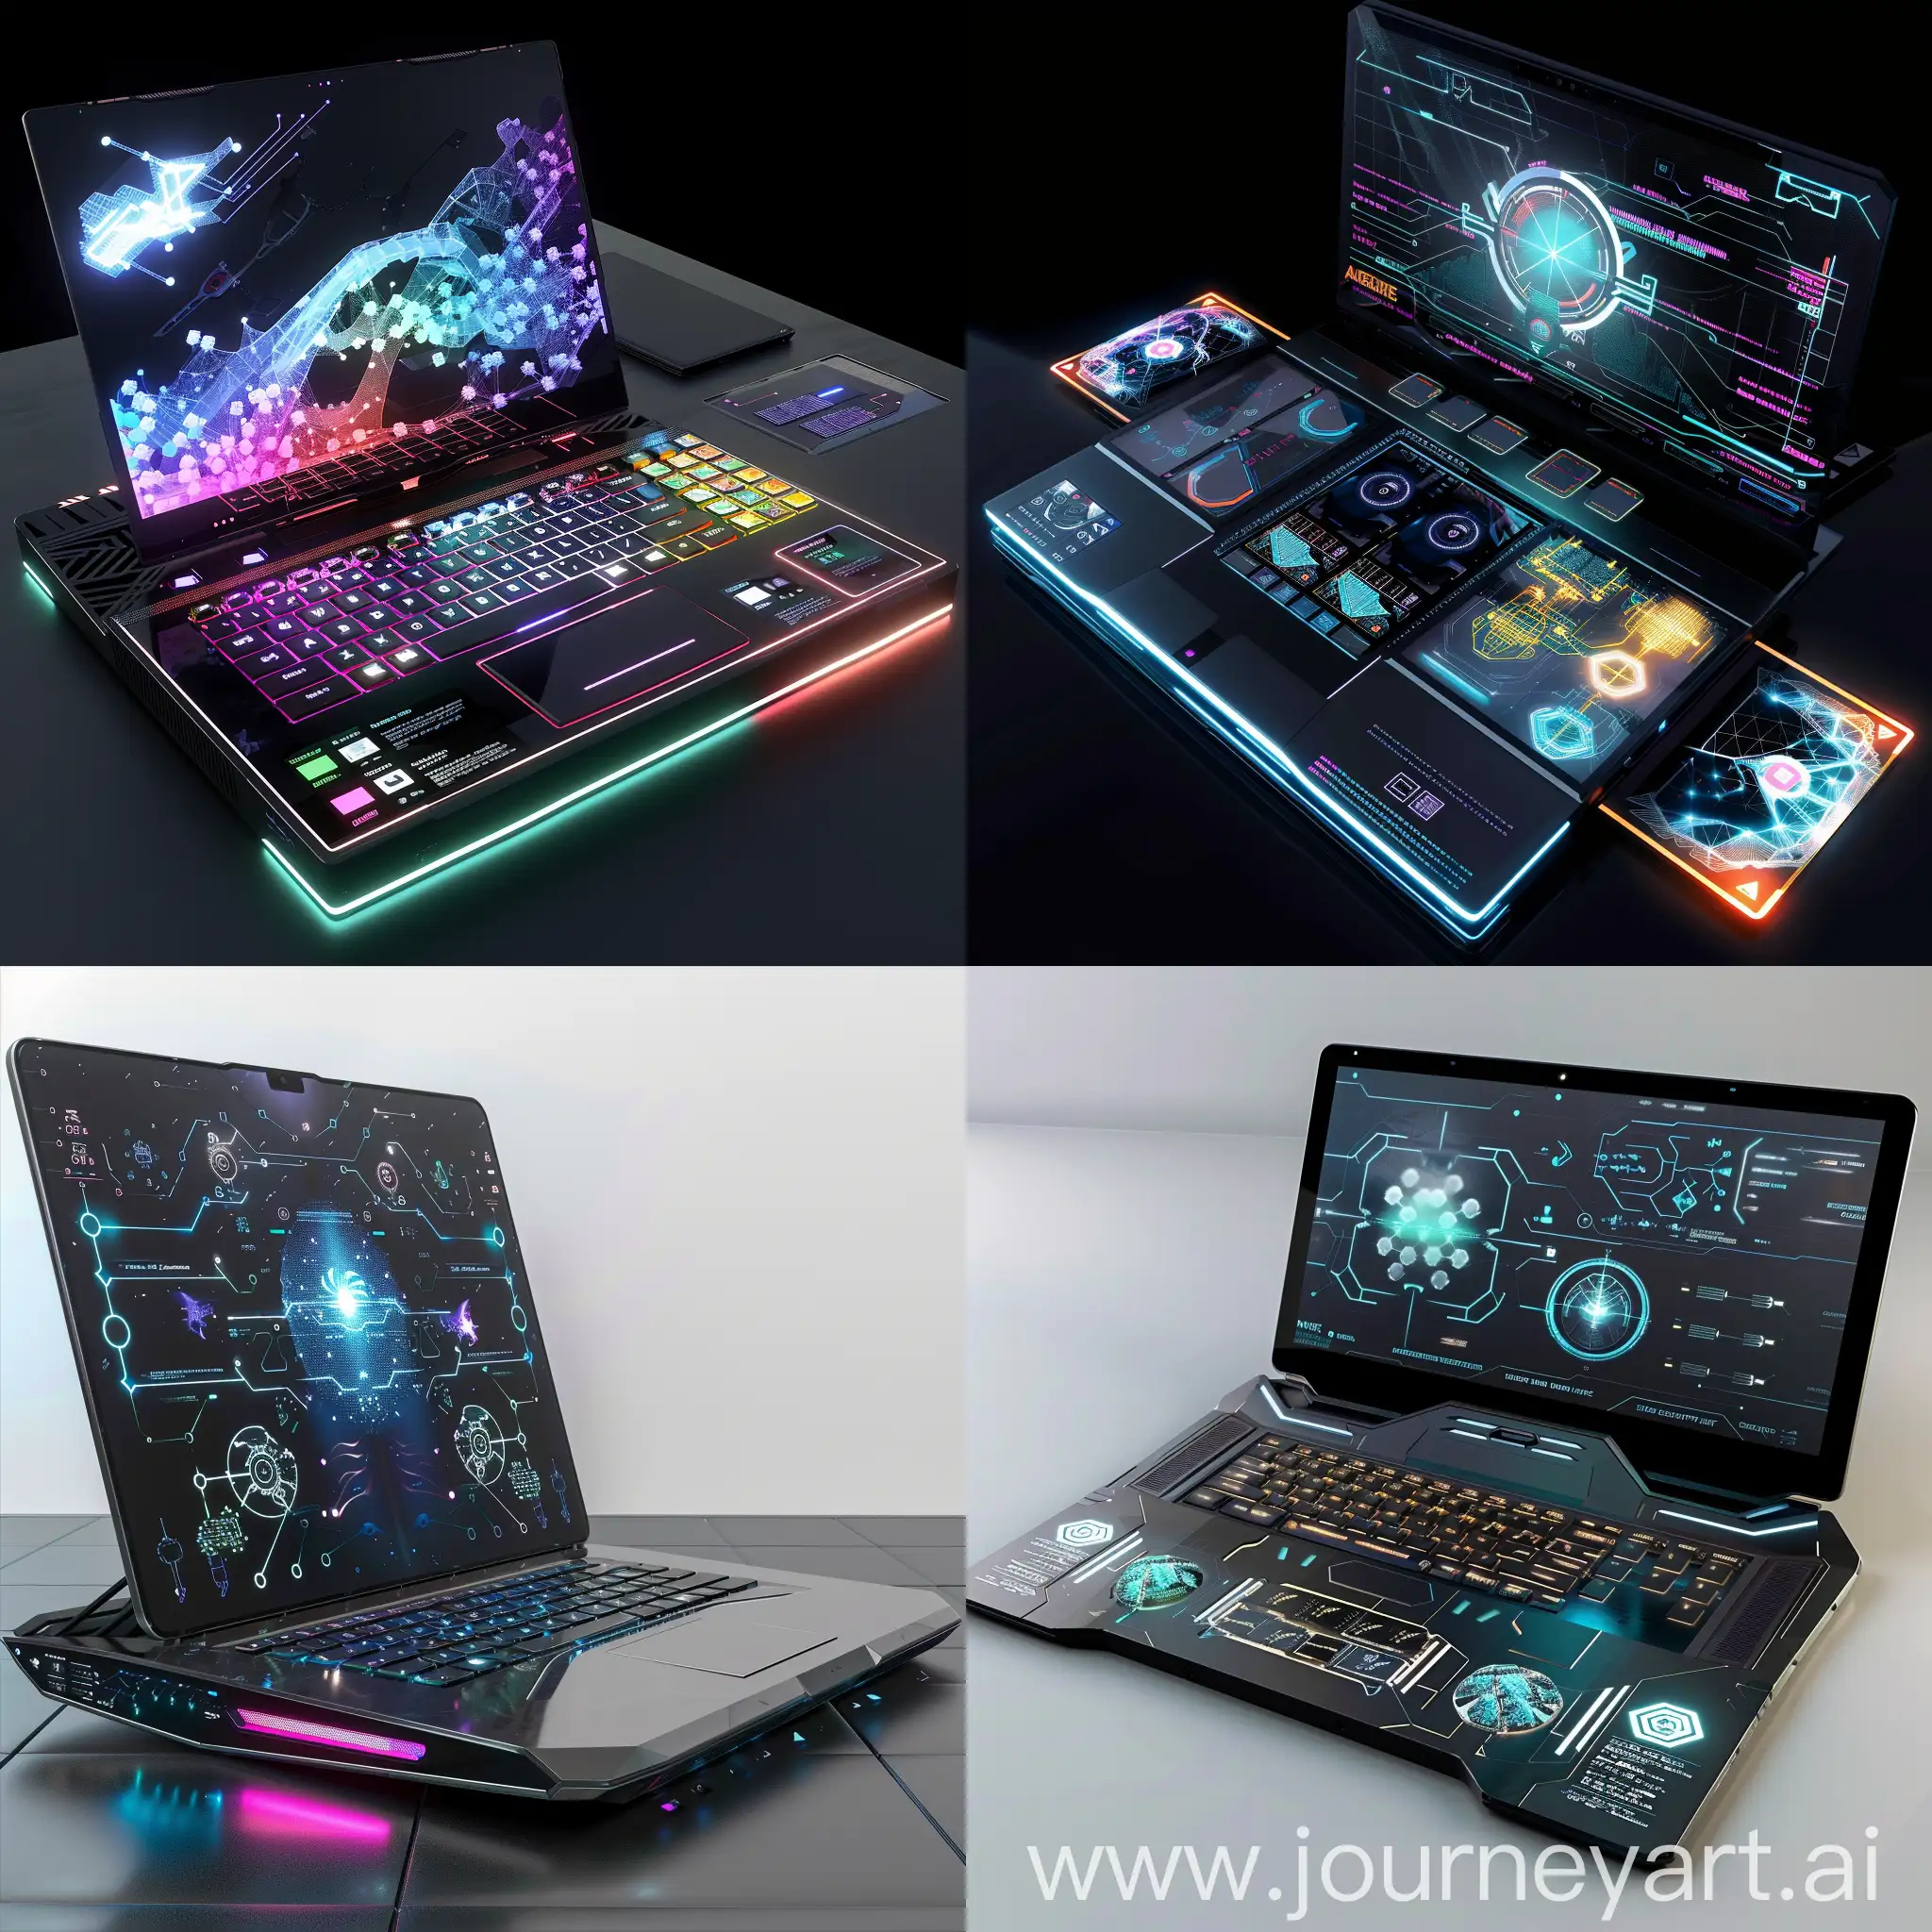 Futuristic-Laptop-with-Quantum-Processors-and-Neural-Processing-Units